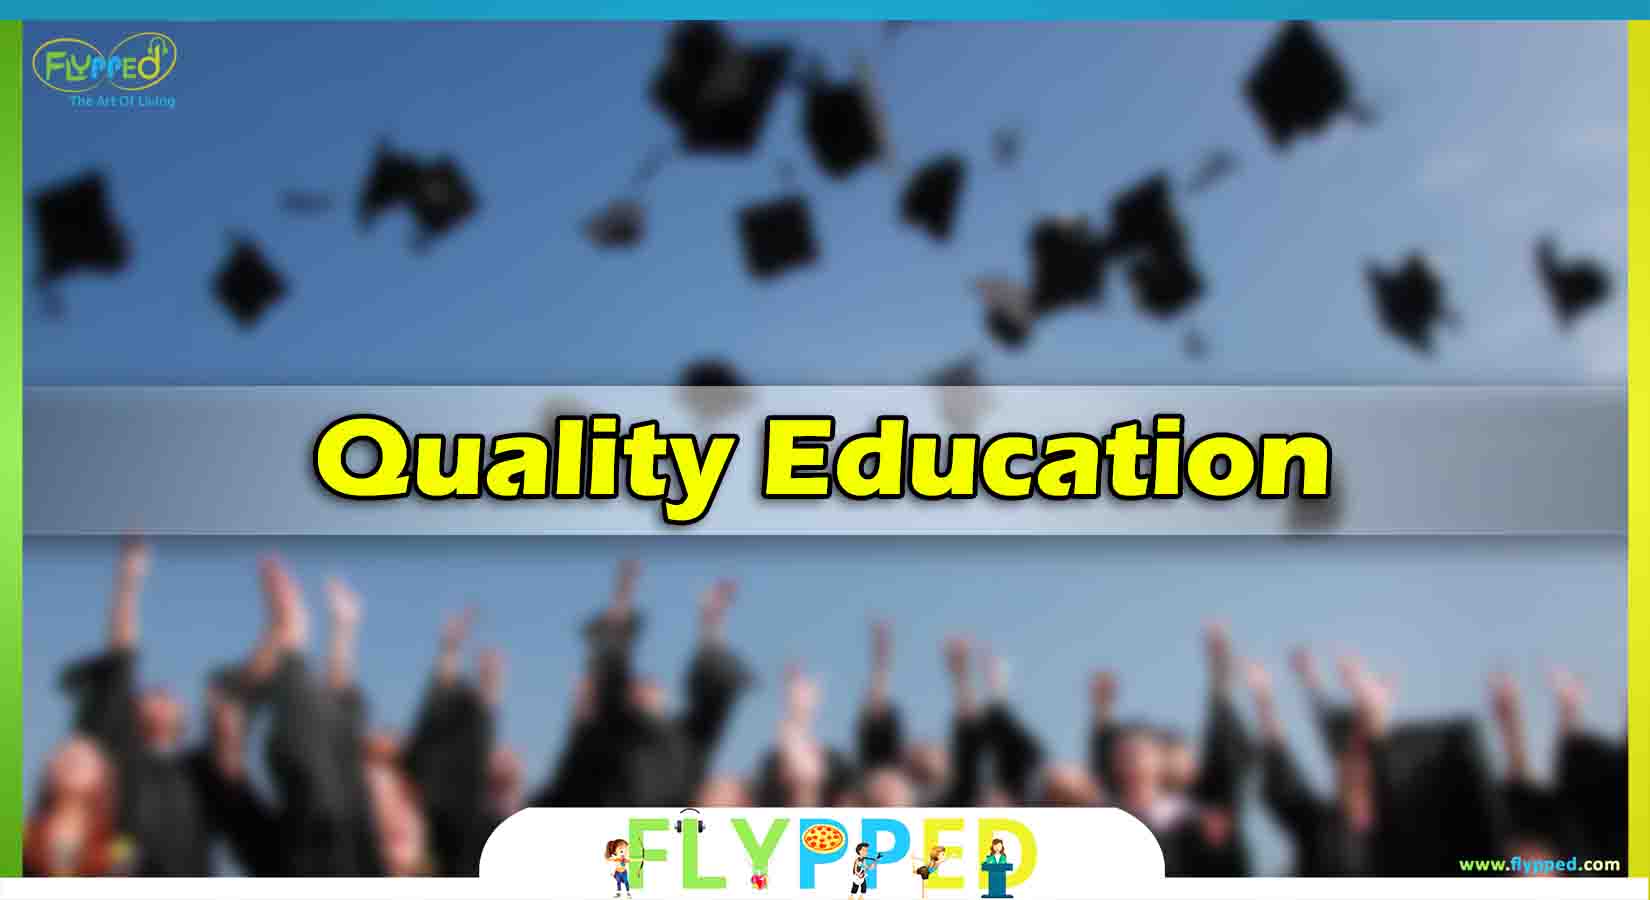 Problems-in-India-from-which-we-have-to-fight-quality-education